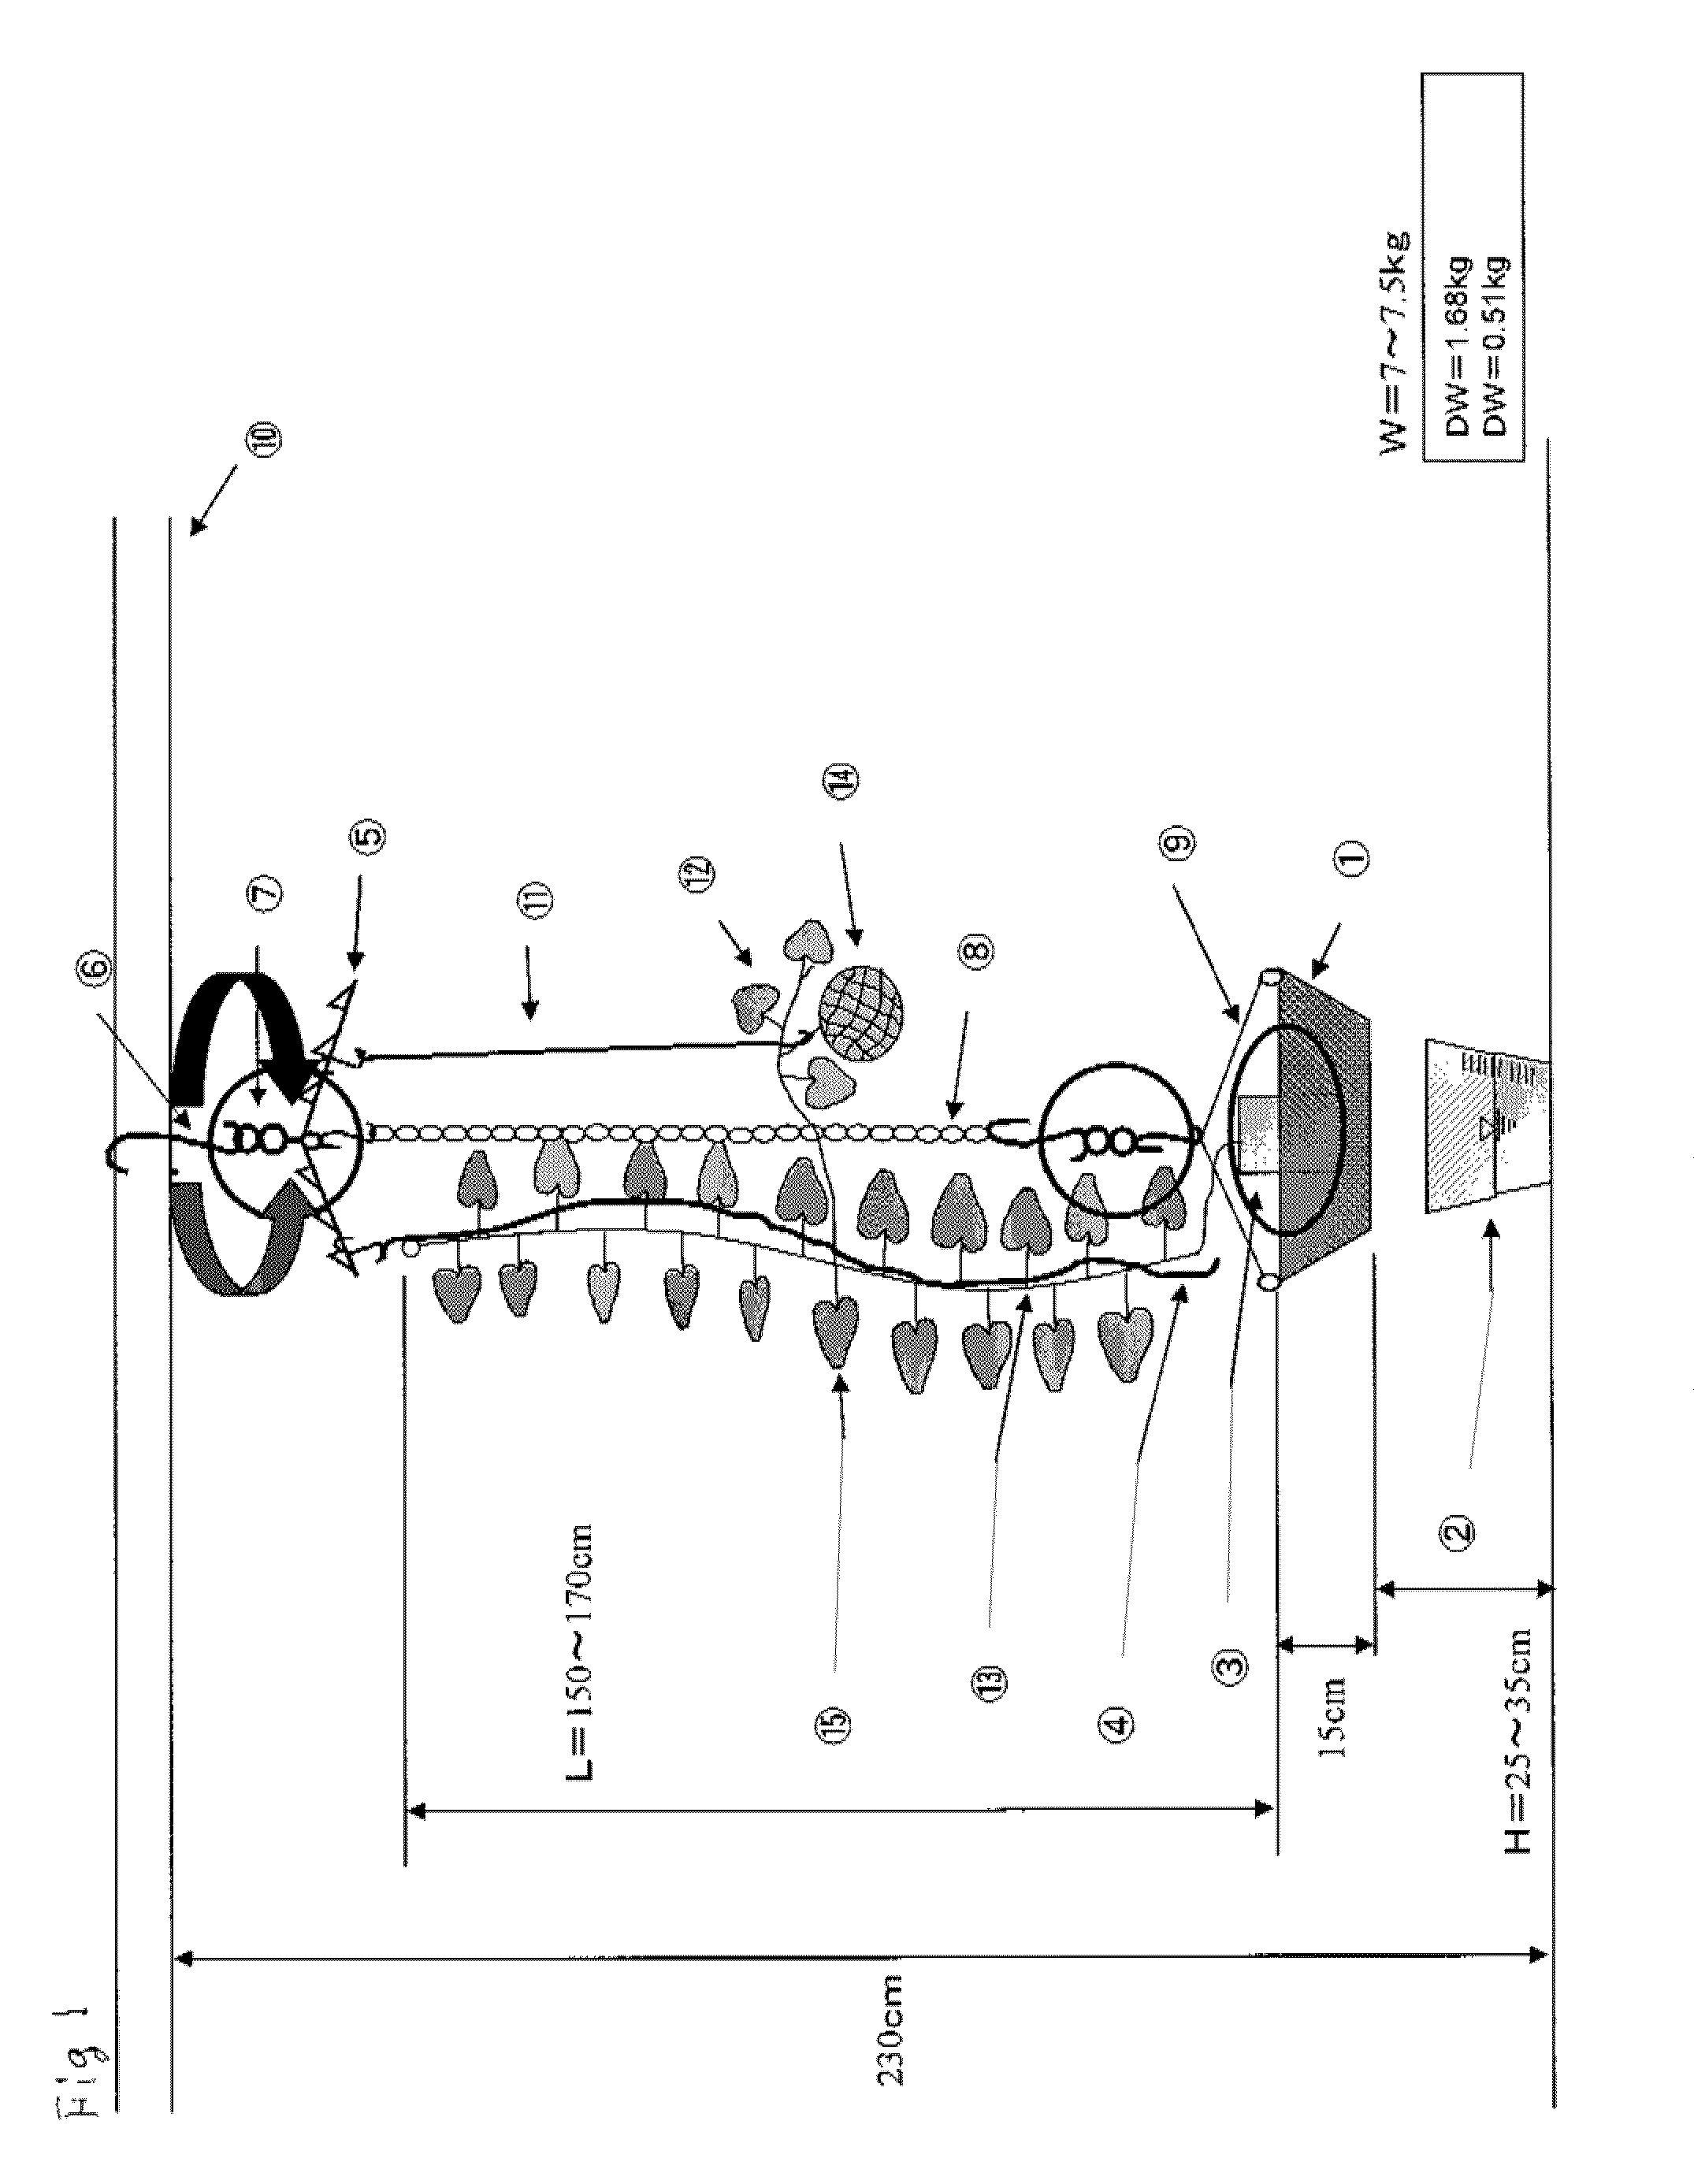 Variable and efficient space utilization type cultivation method